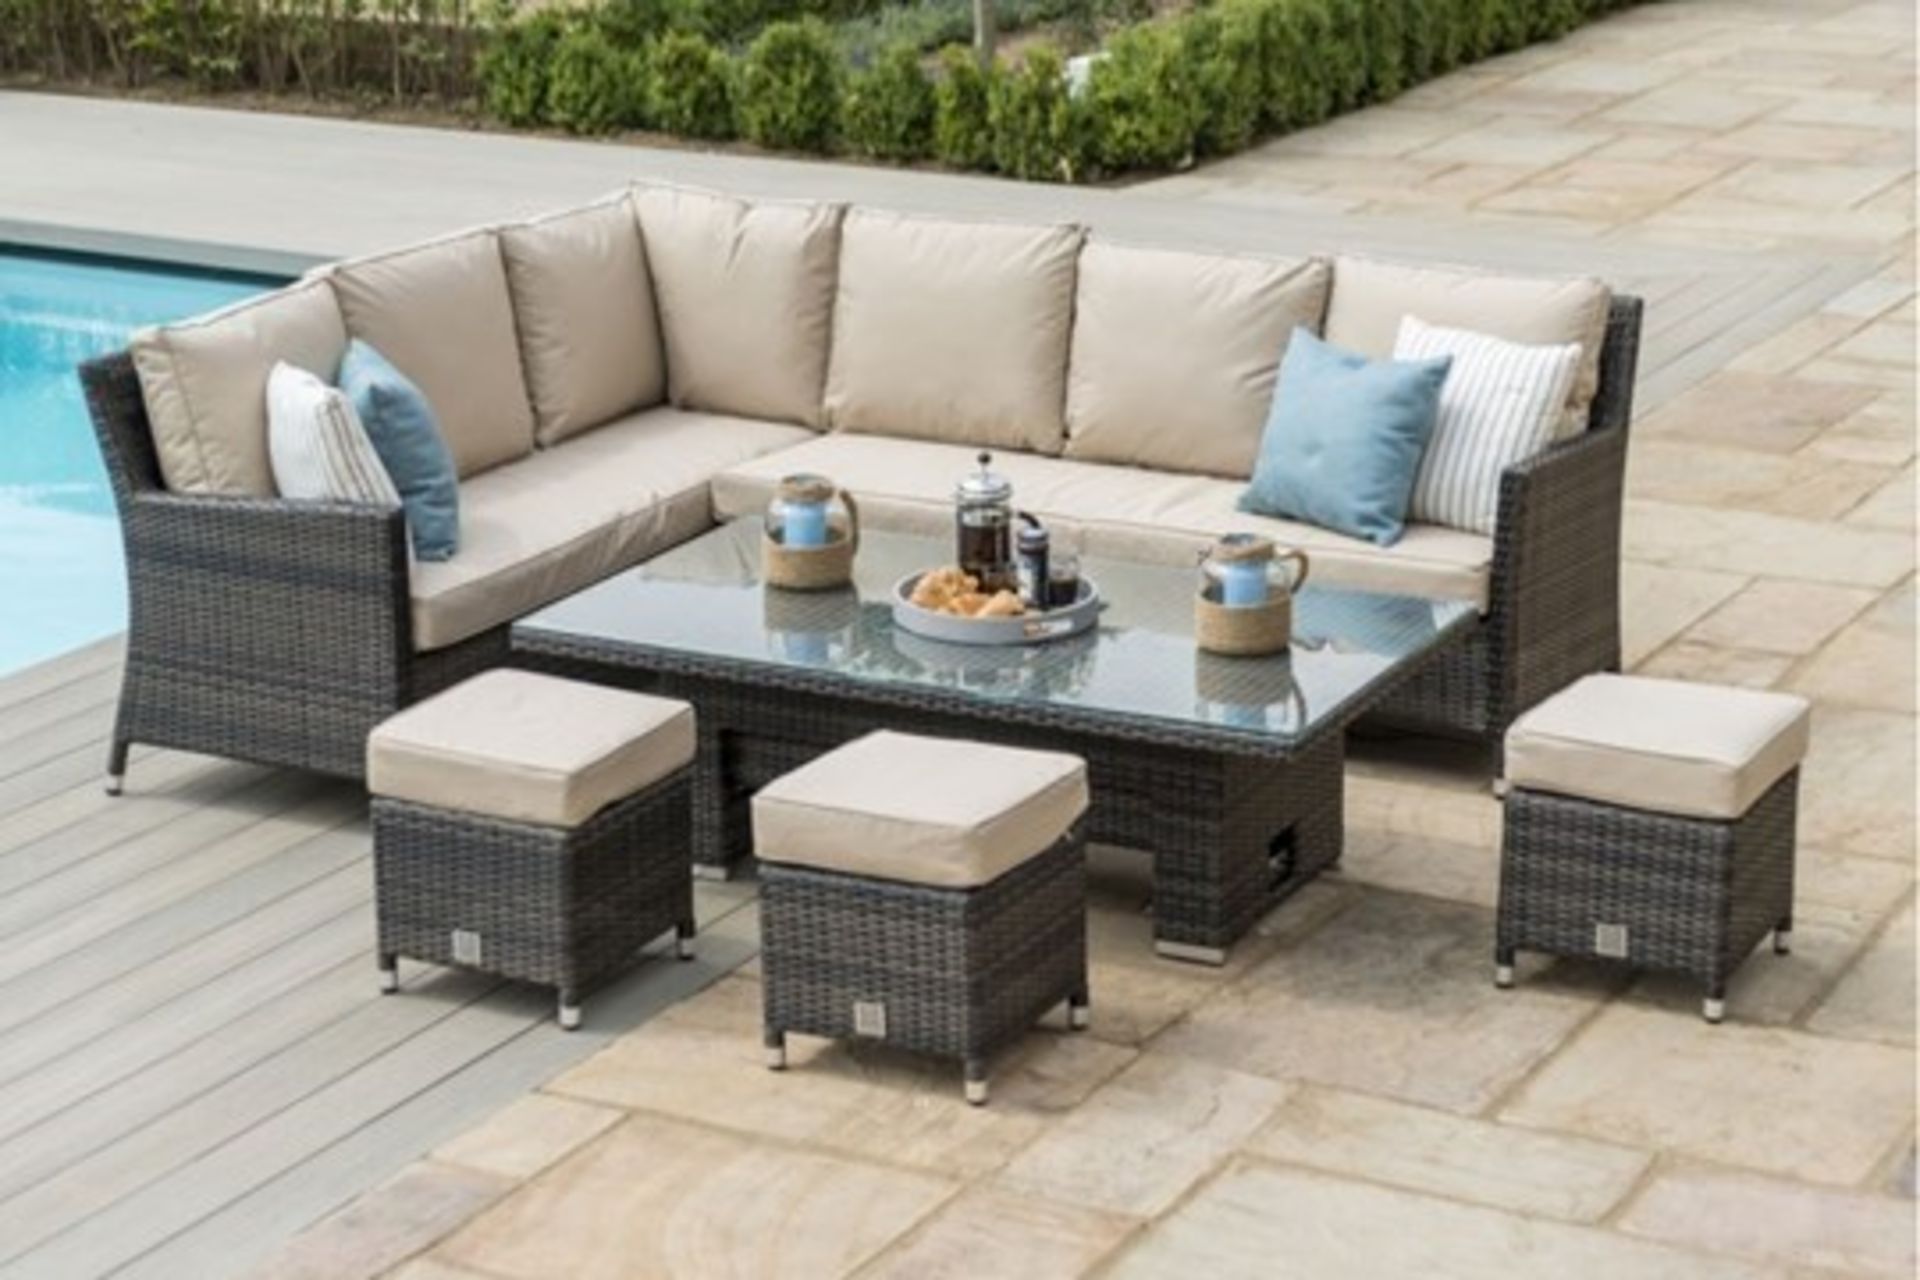 Rattan Venice Corner Outdoor Dining Set With Ice Bucket And Rising Table (Brown) *BRAND NEW* - Image 2 of 4